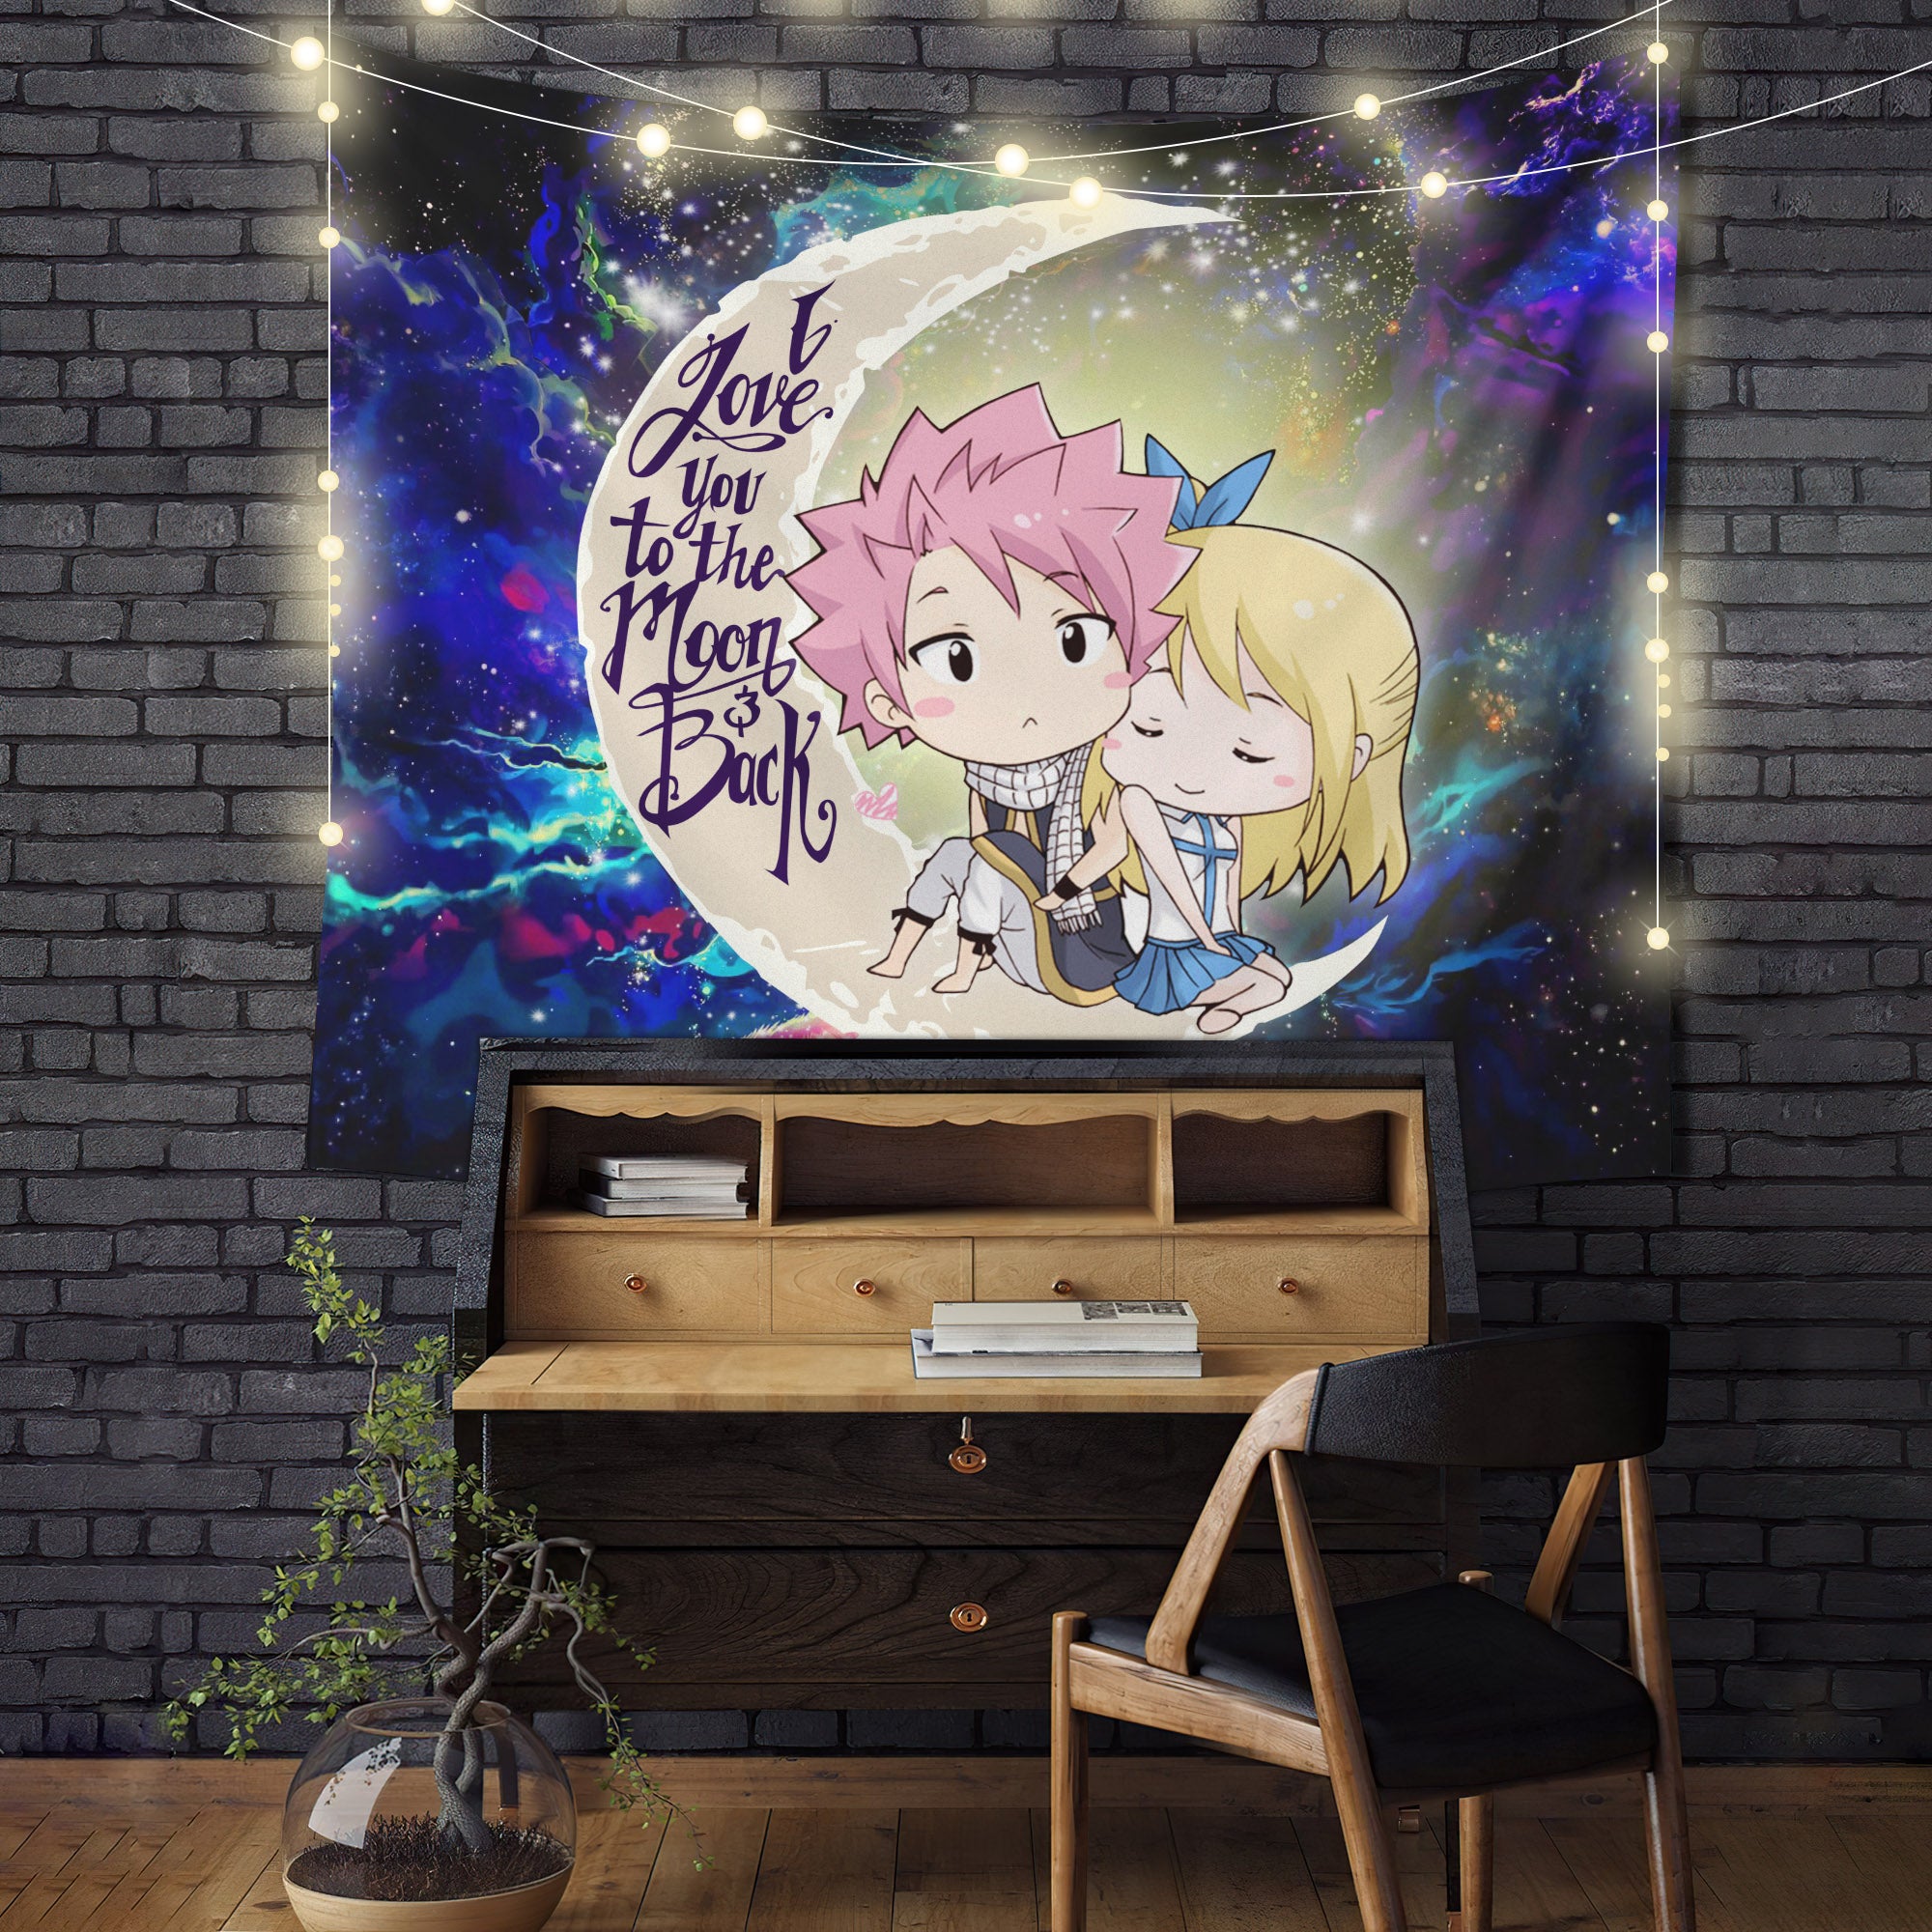 Natsu Fairy Tail Anime Moon And Back Galaxy Tapestry Room Decor